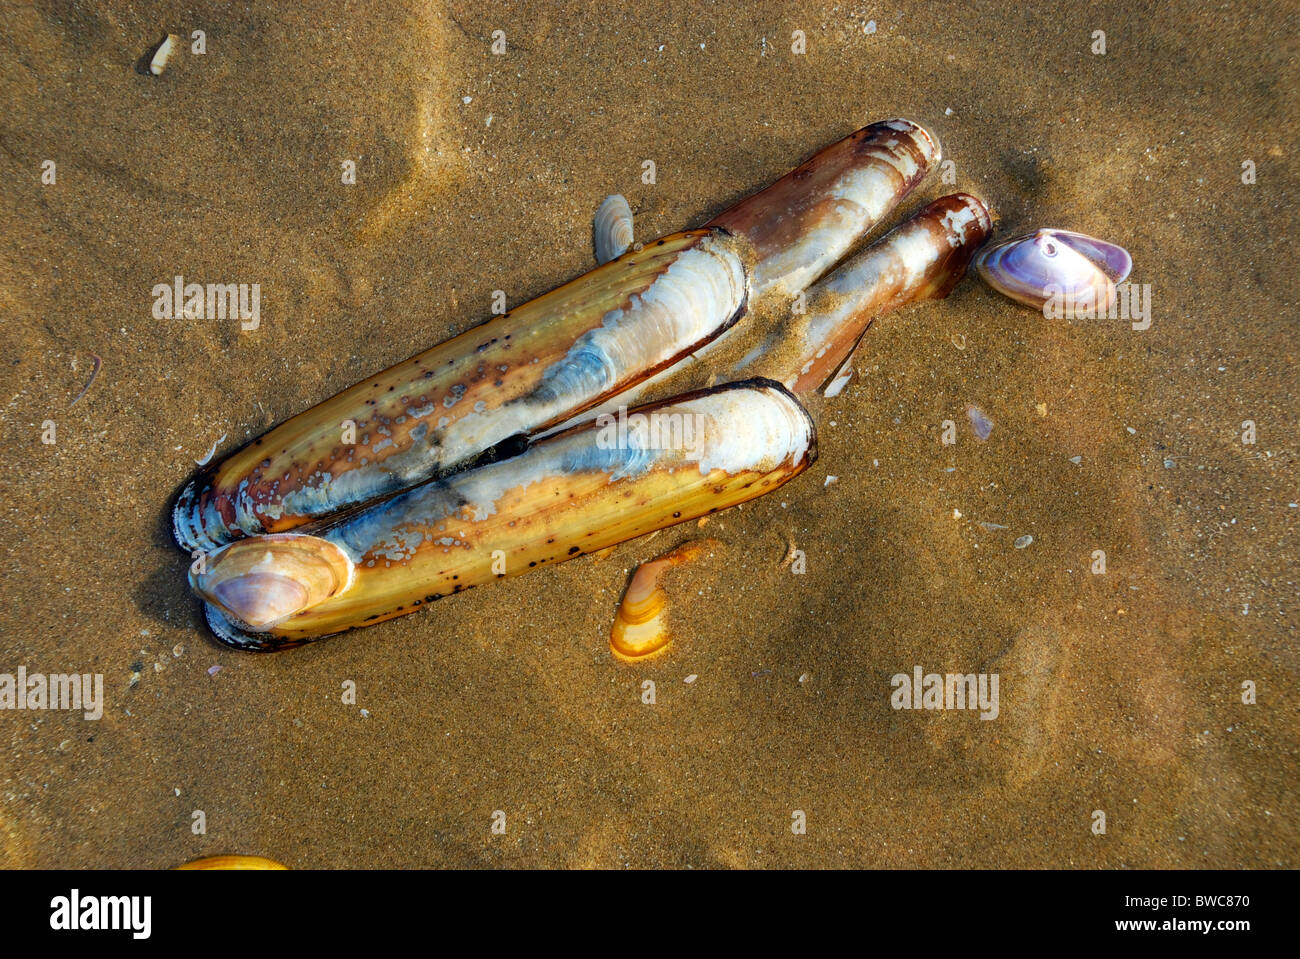 Razor Shell or Razor Clam on a sand beach in South Wales in the United Kingdom. Stock Photo